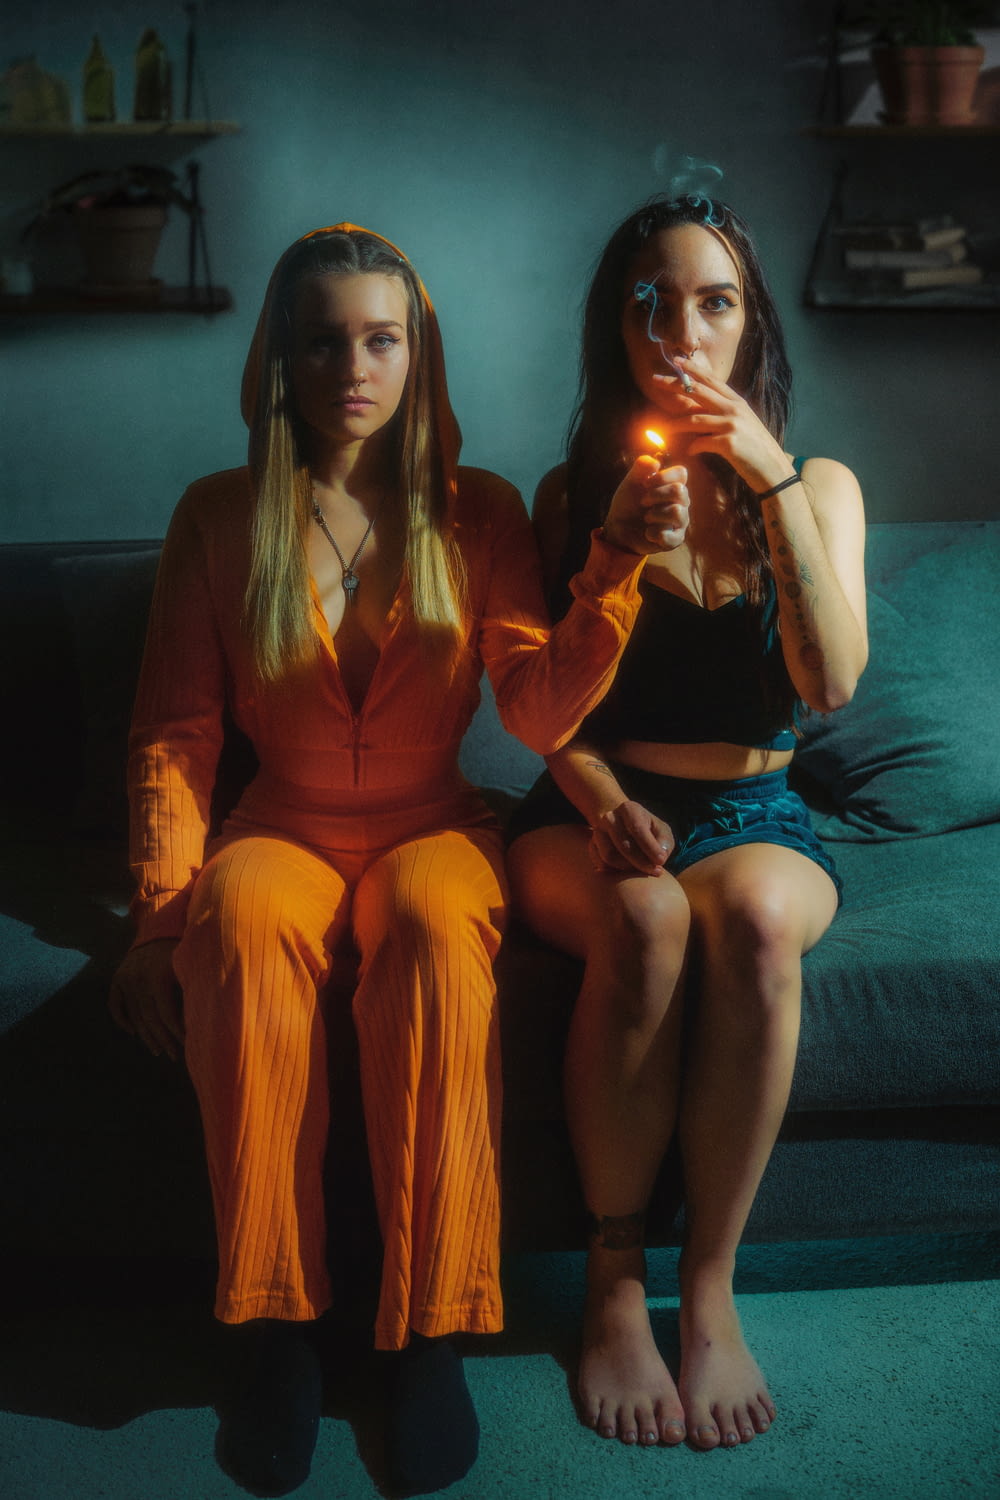 two women sitting on a couch holding a lit candle